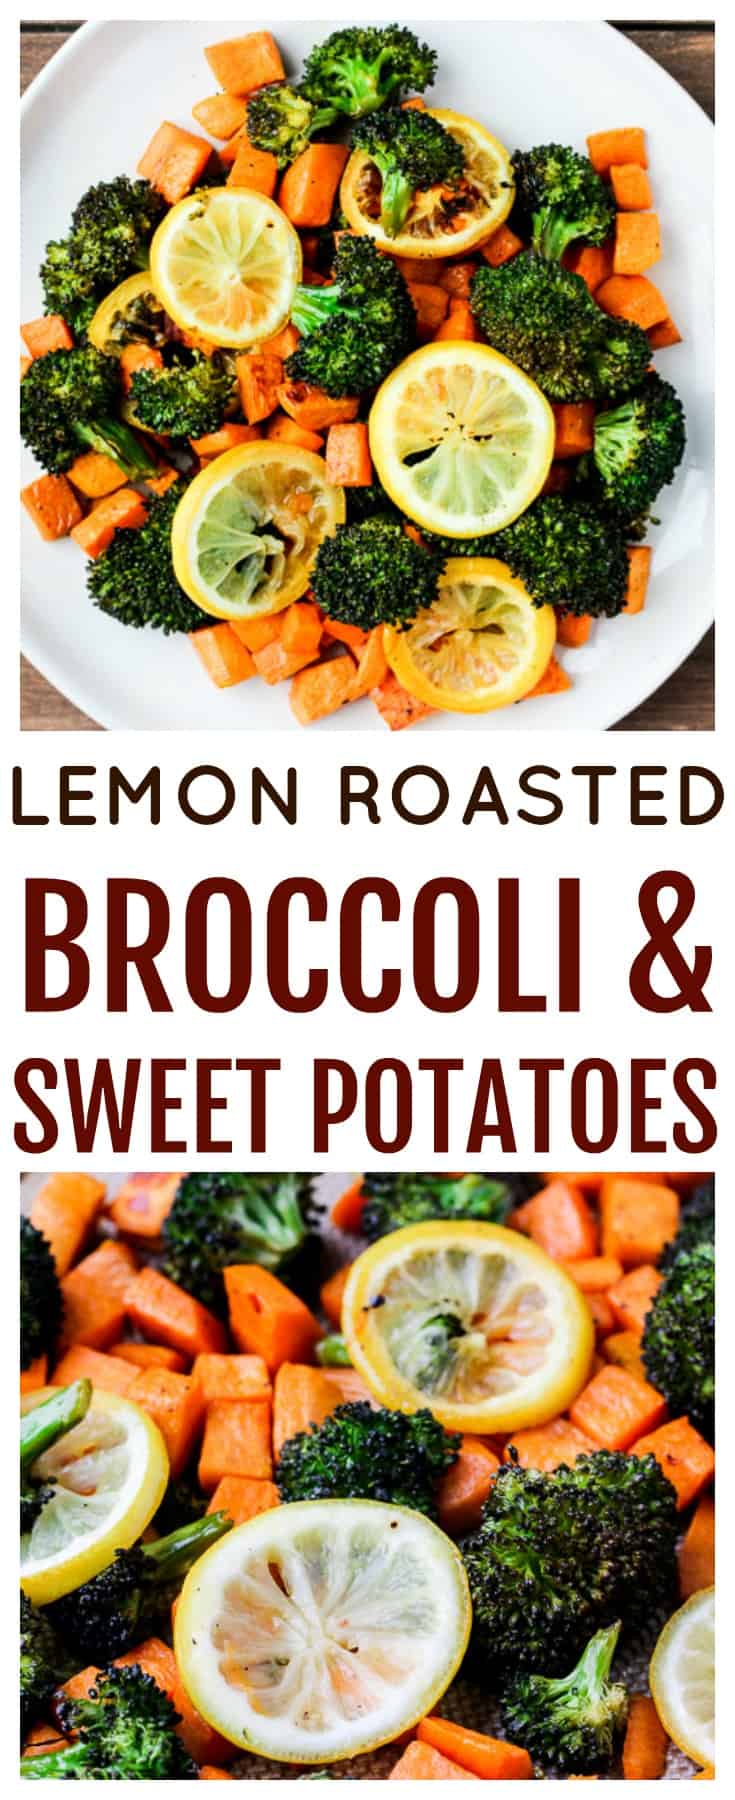 Lemon Roasted Broccoli and Sweet Potatoes in an easy side dish recipe that's whole 30 compliant, gluten free, vegetarian, and can be ready in about 30 minutes! | #dlbrecipes #sidedishes #sidedishrecipe #whole30 #glutenfree